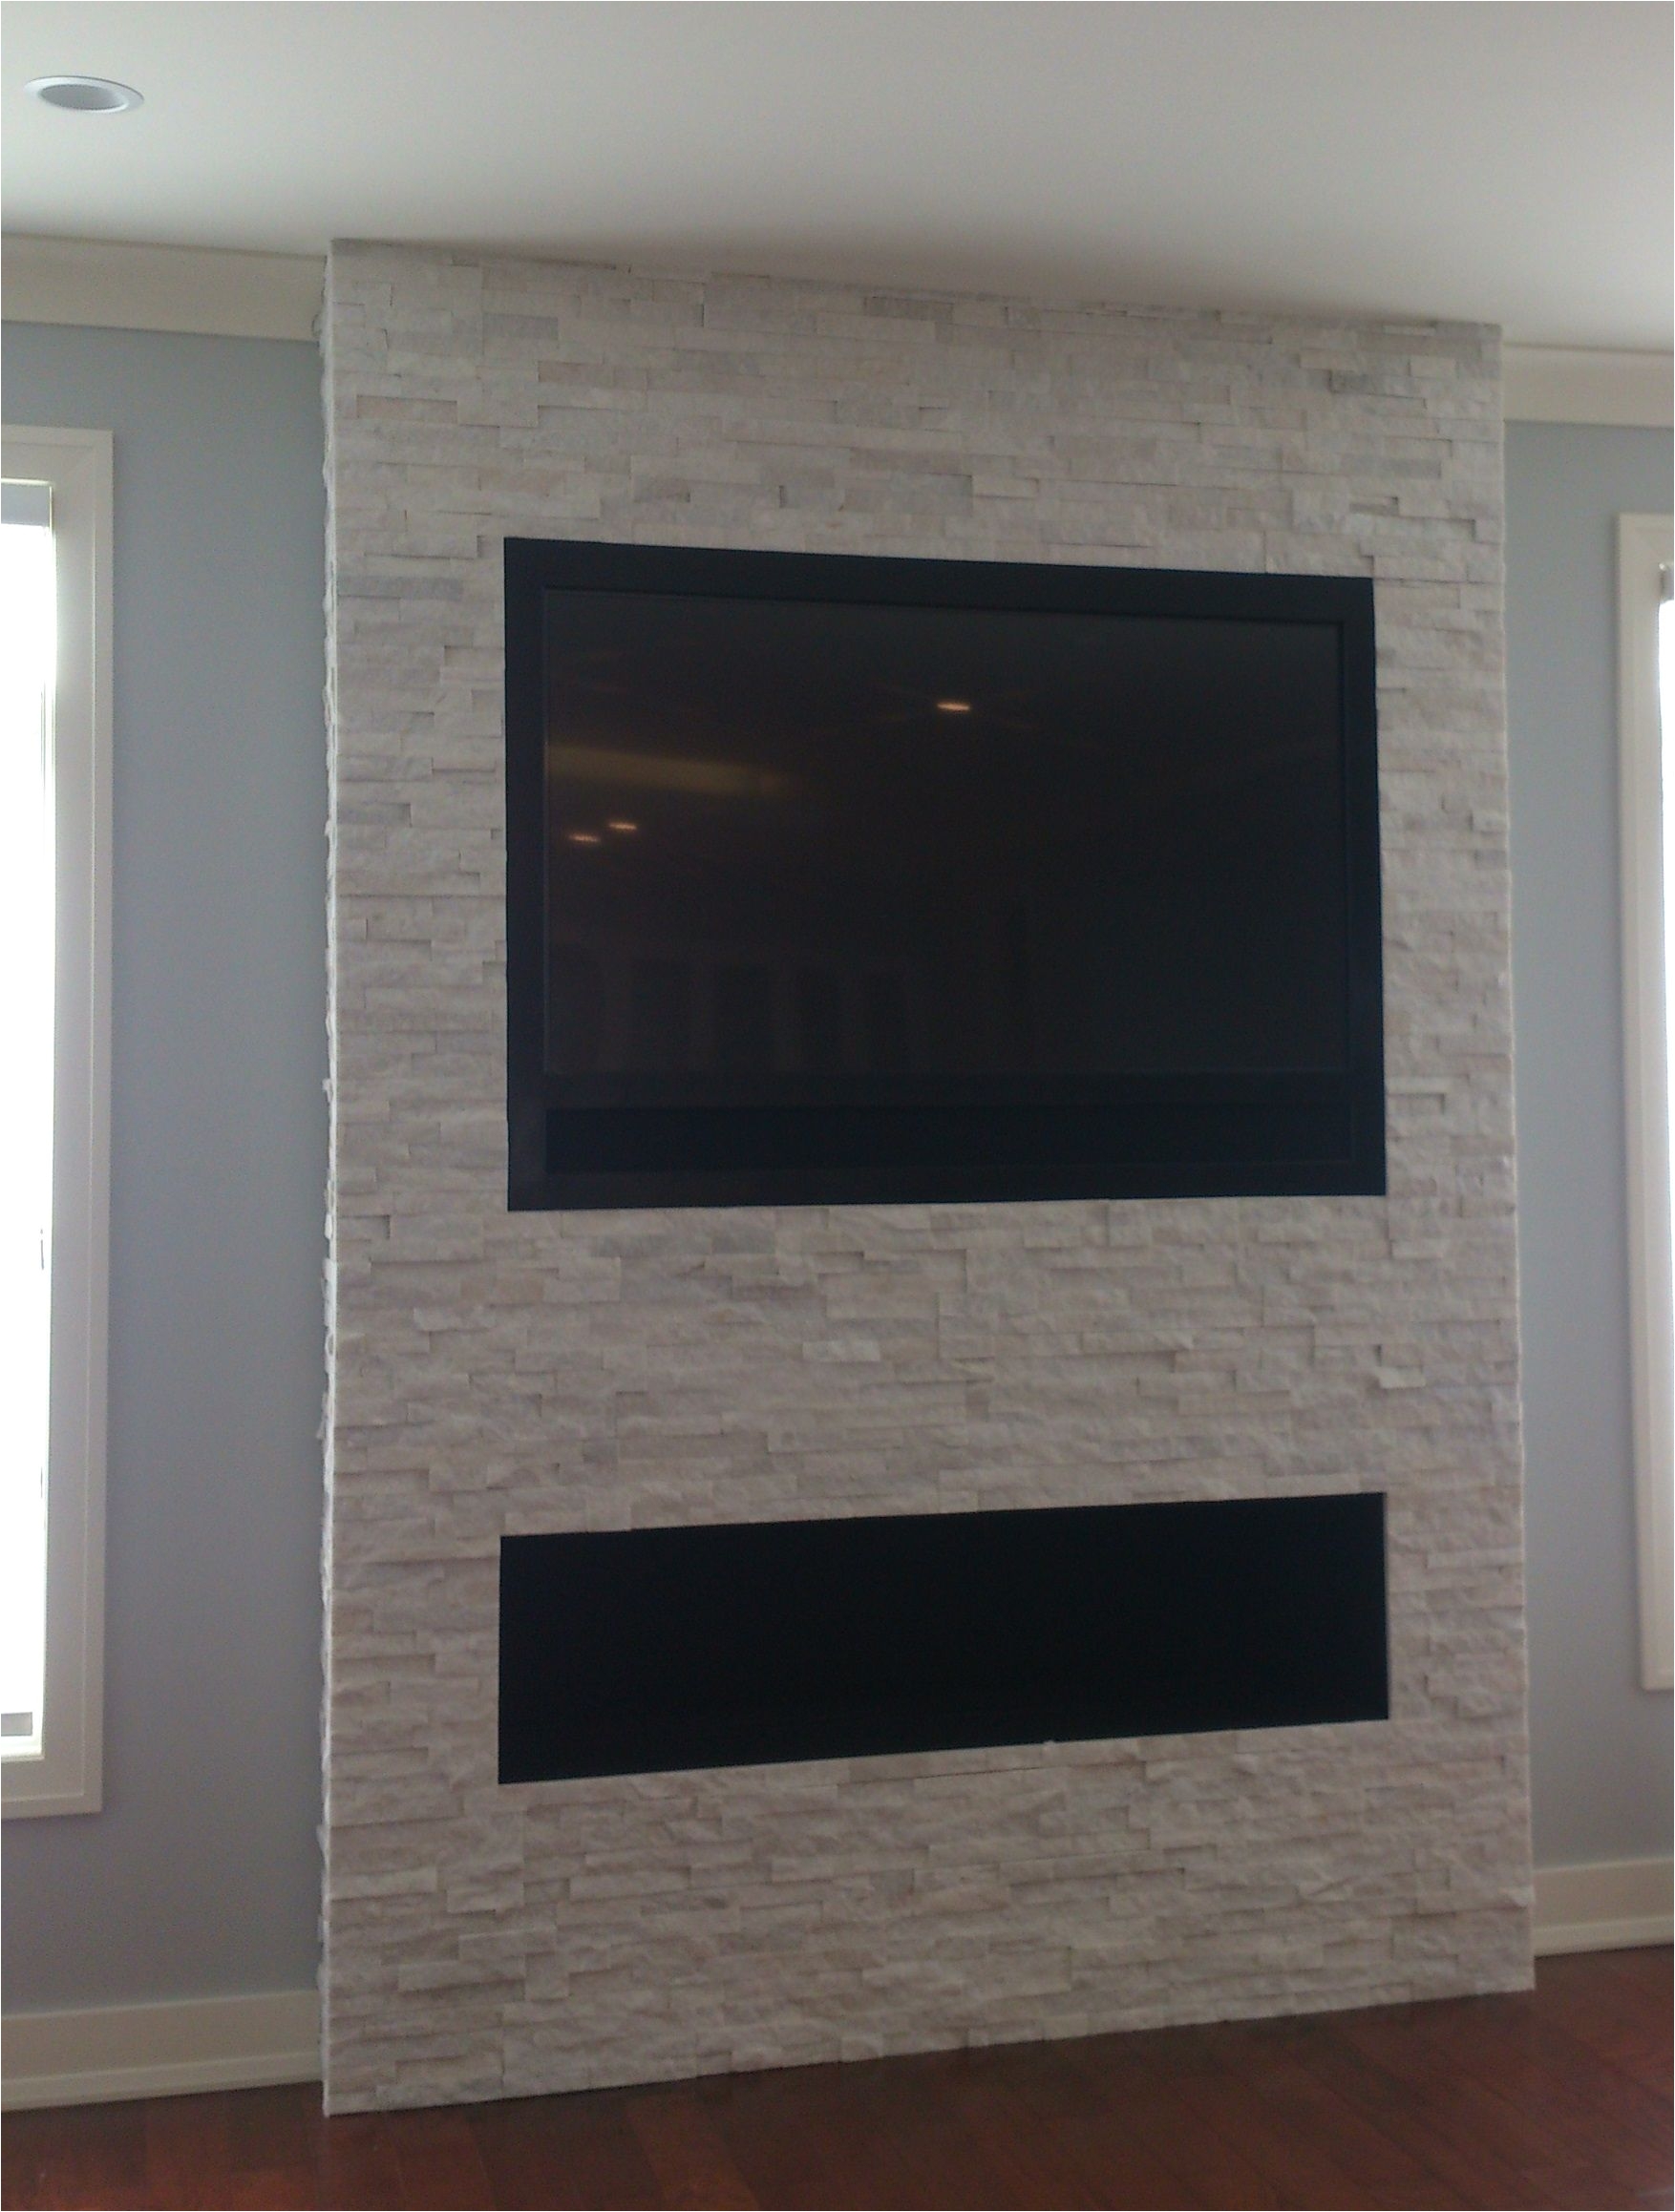 Fireplace Mantel Height Beautiful Gas Fireplace without Mantle Wondering How to Mount A Tv